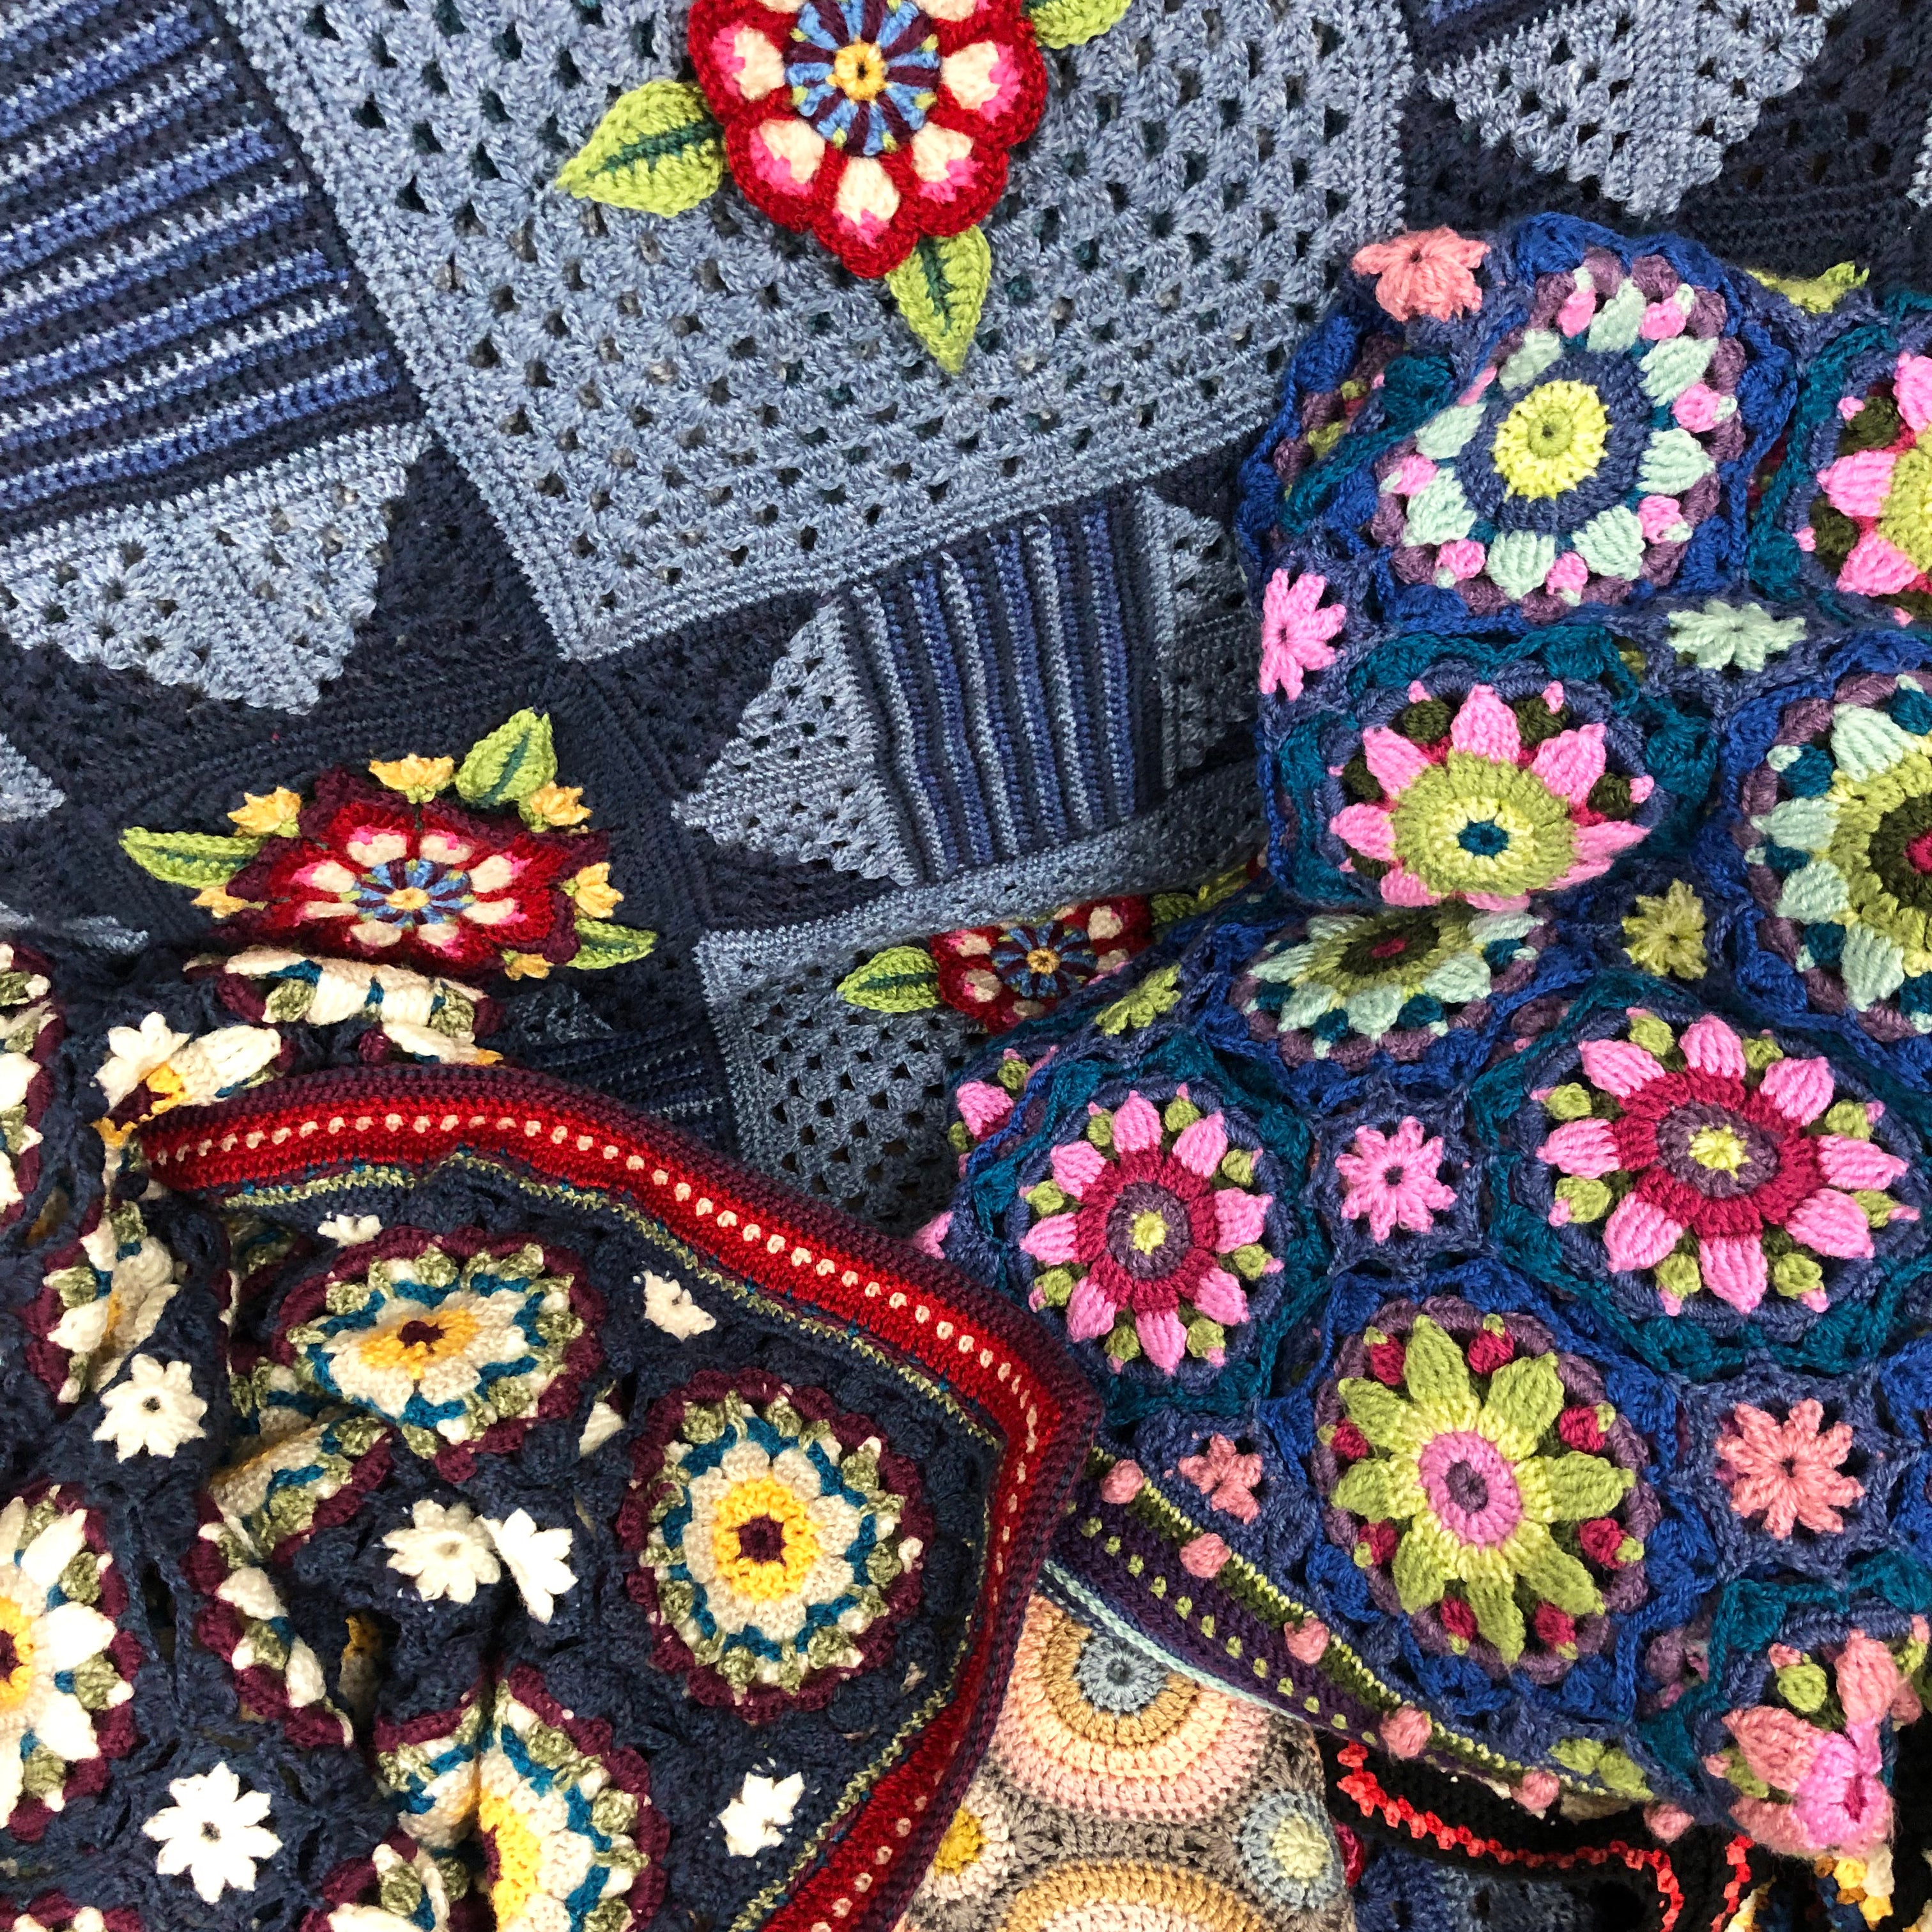 A Crochet extravaganza with Jane Crowfoot